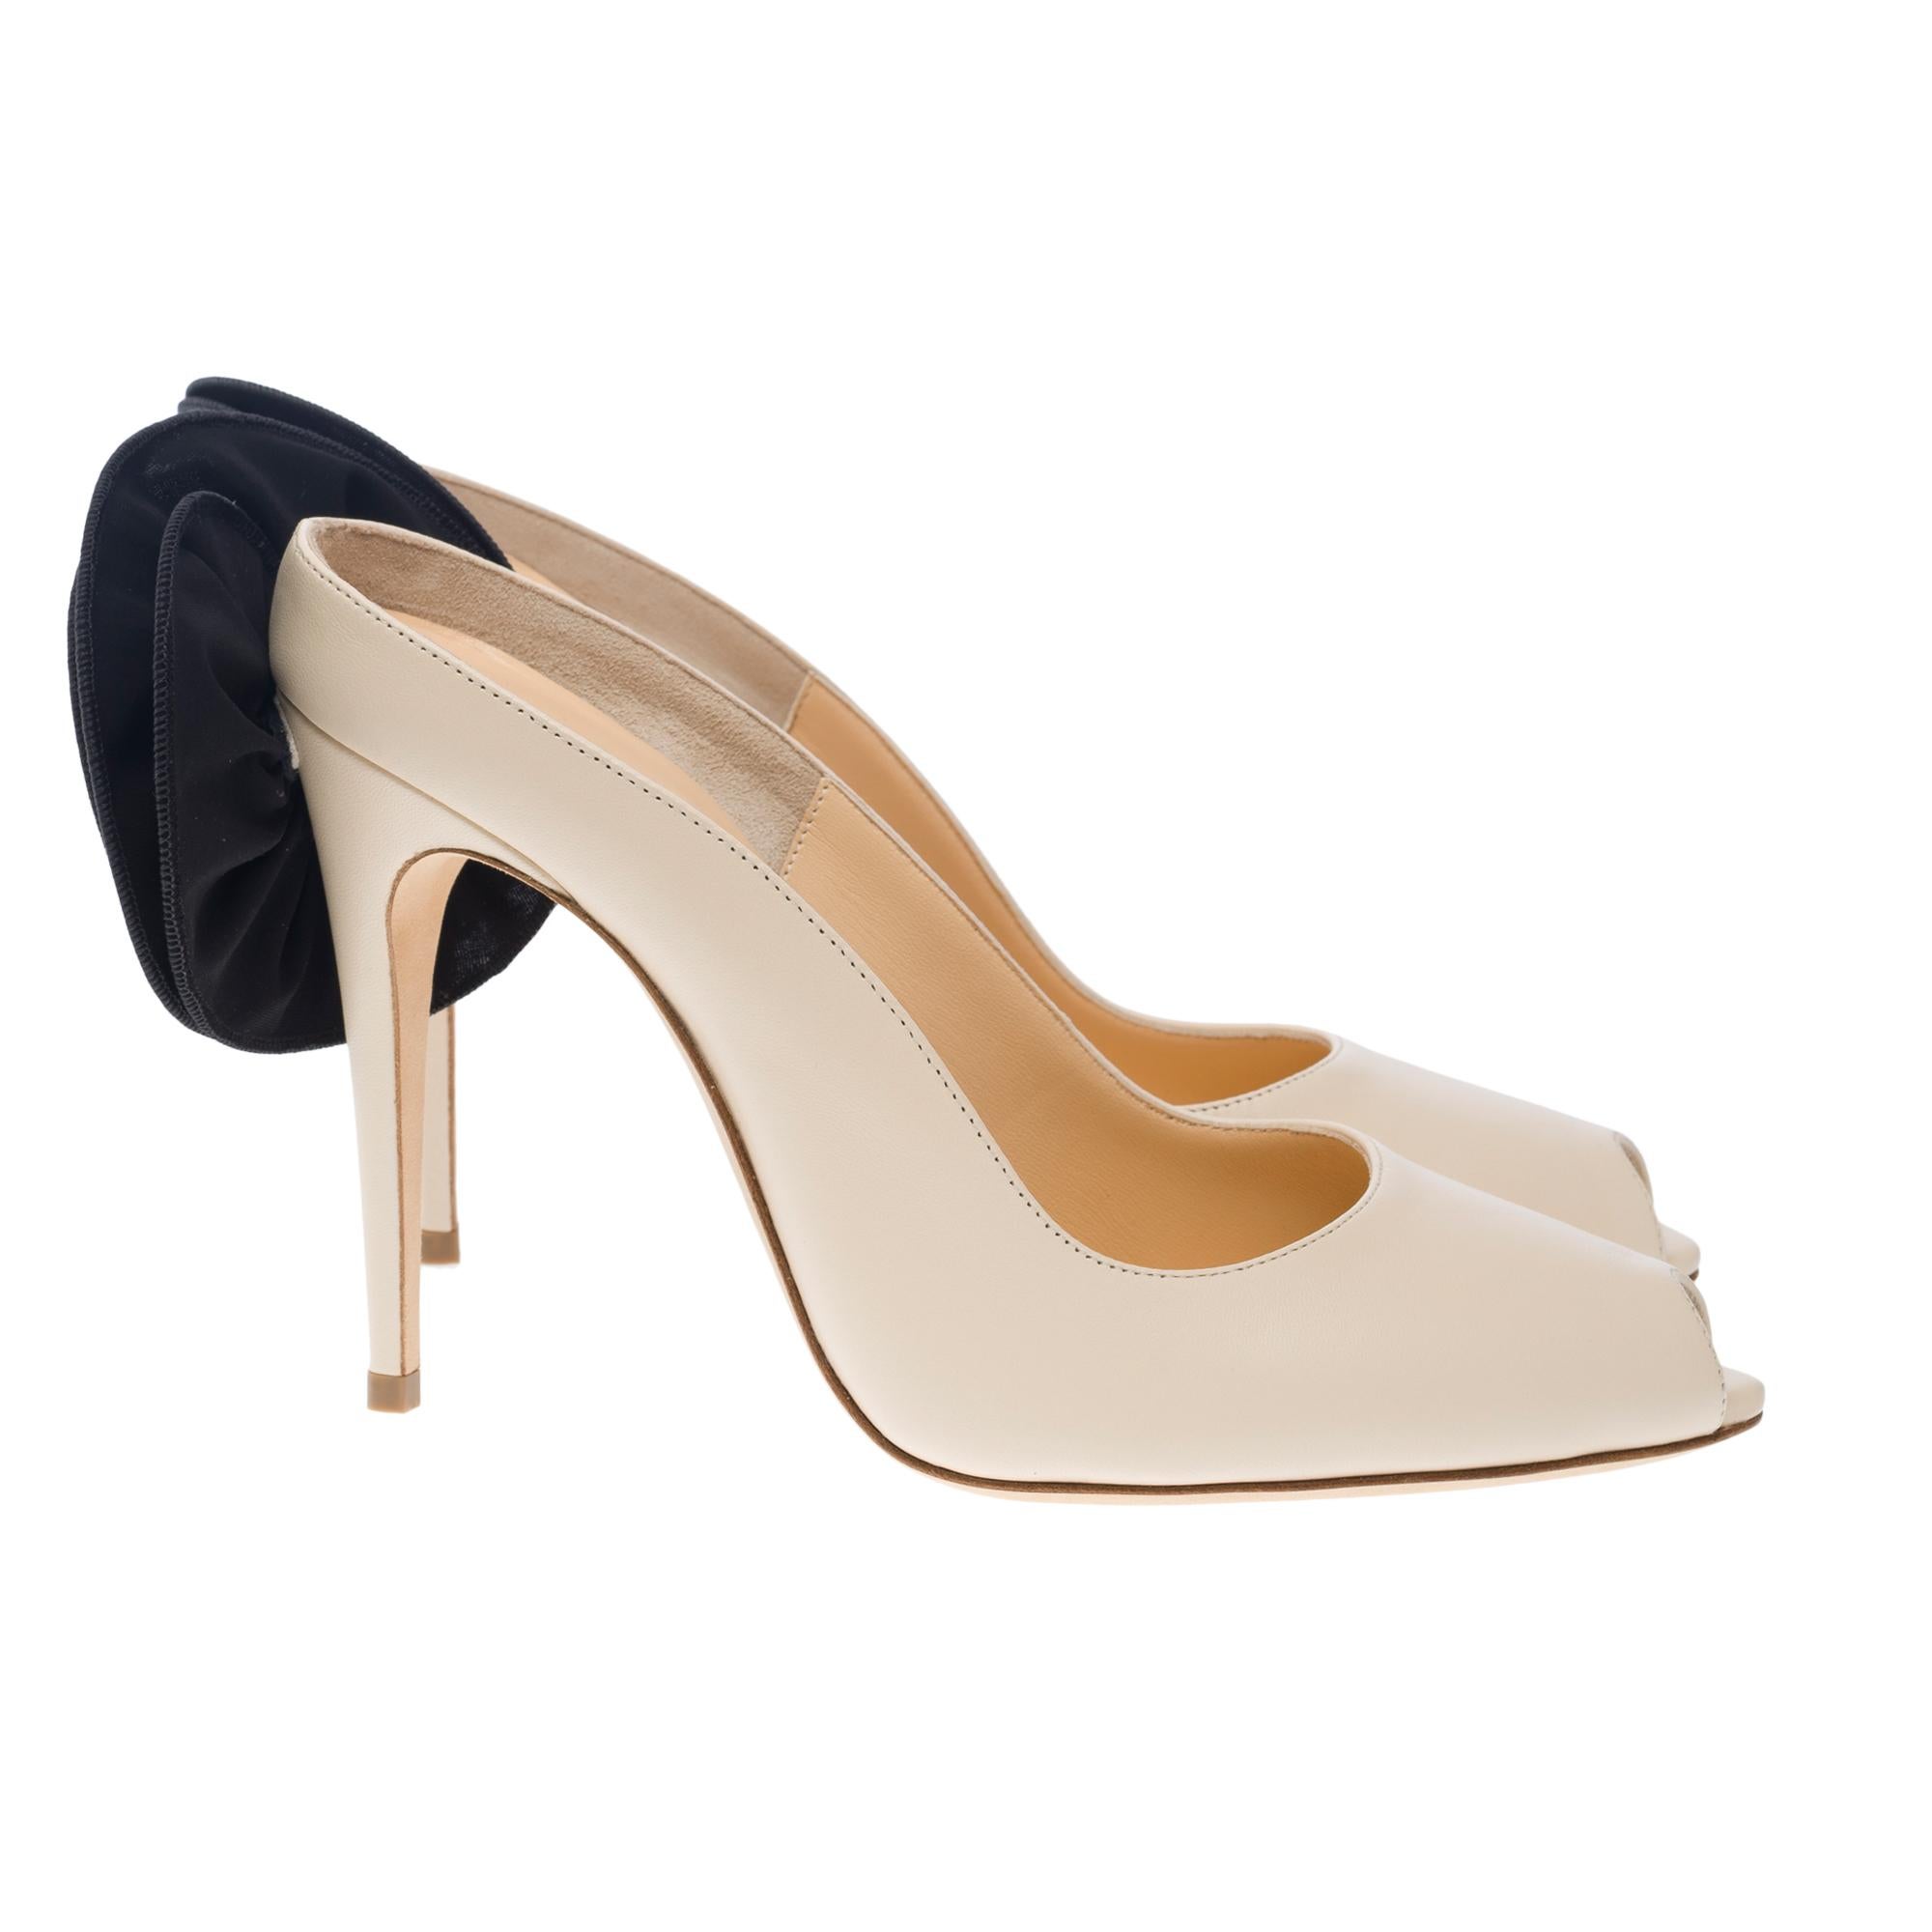 New Magda Butrym Peep Toe Mules in Cream leather , Size 38 For Sale 2